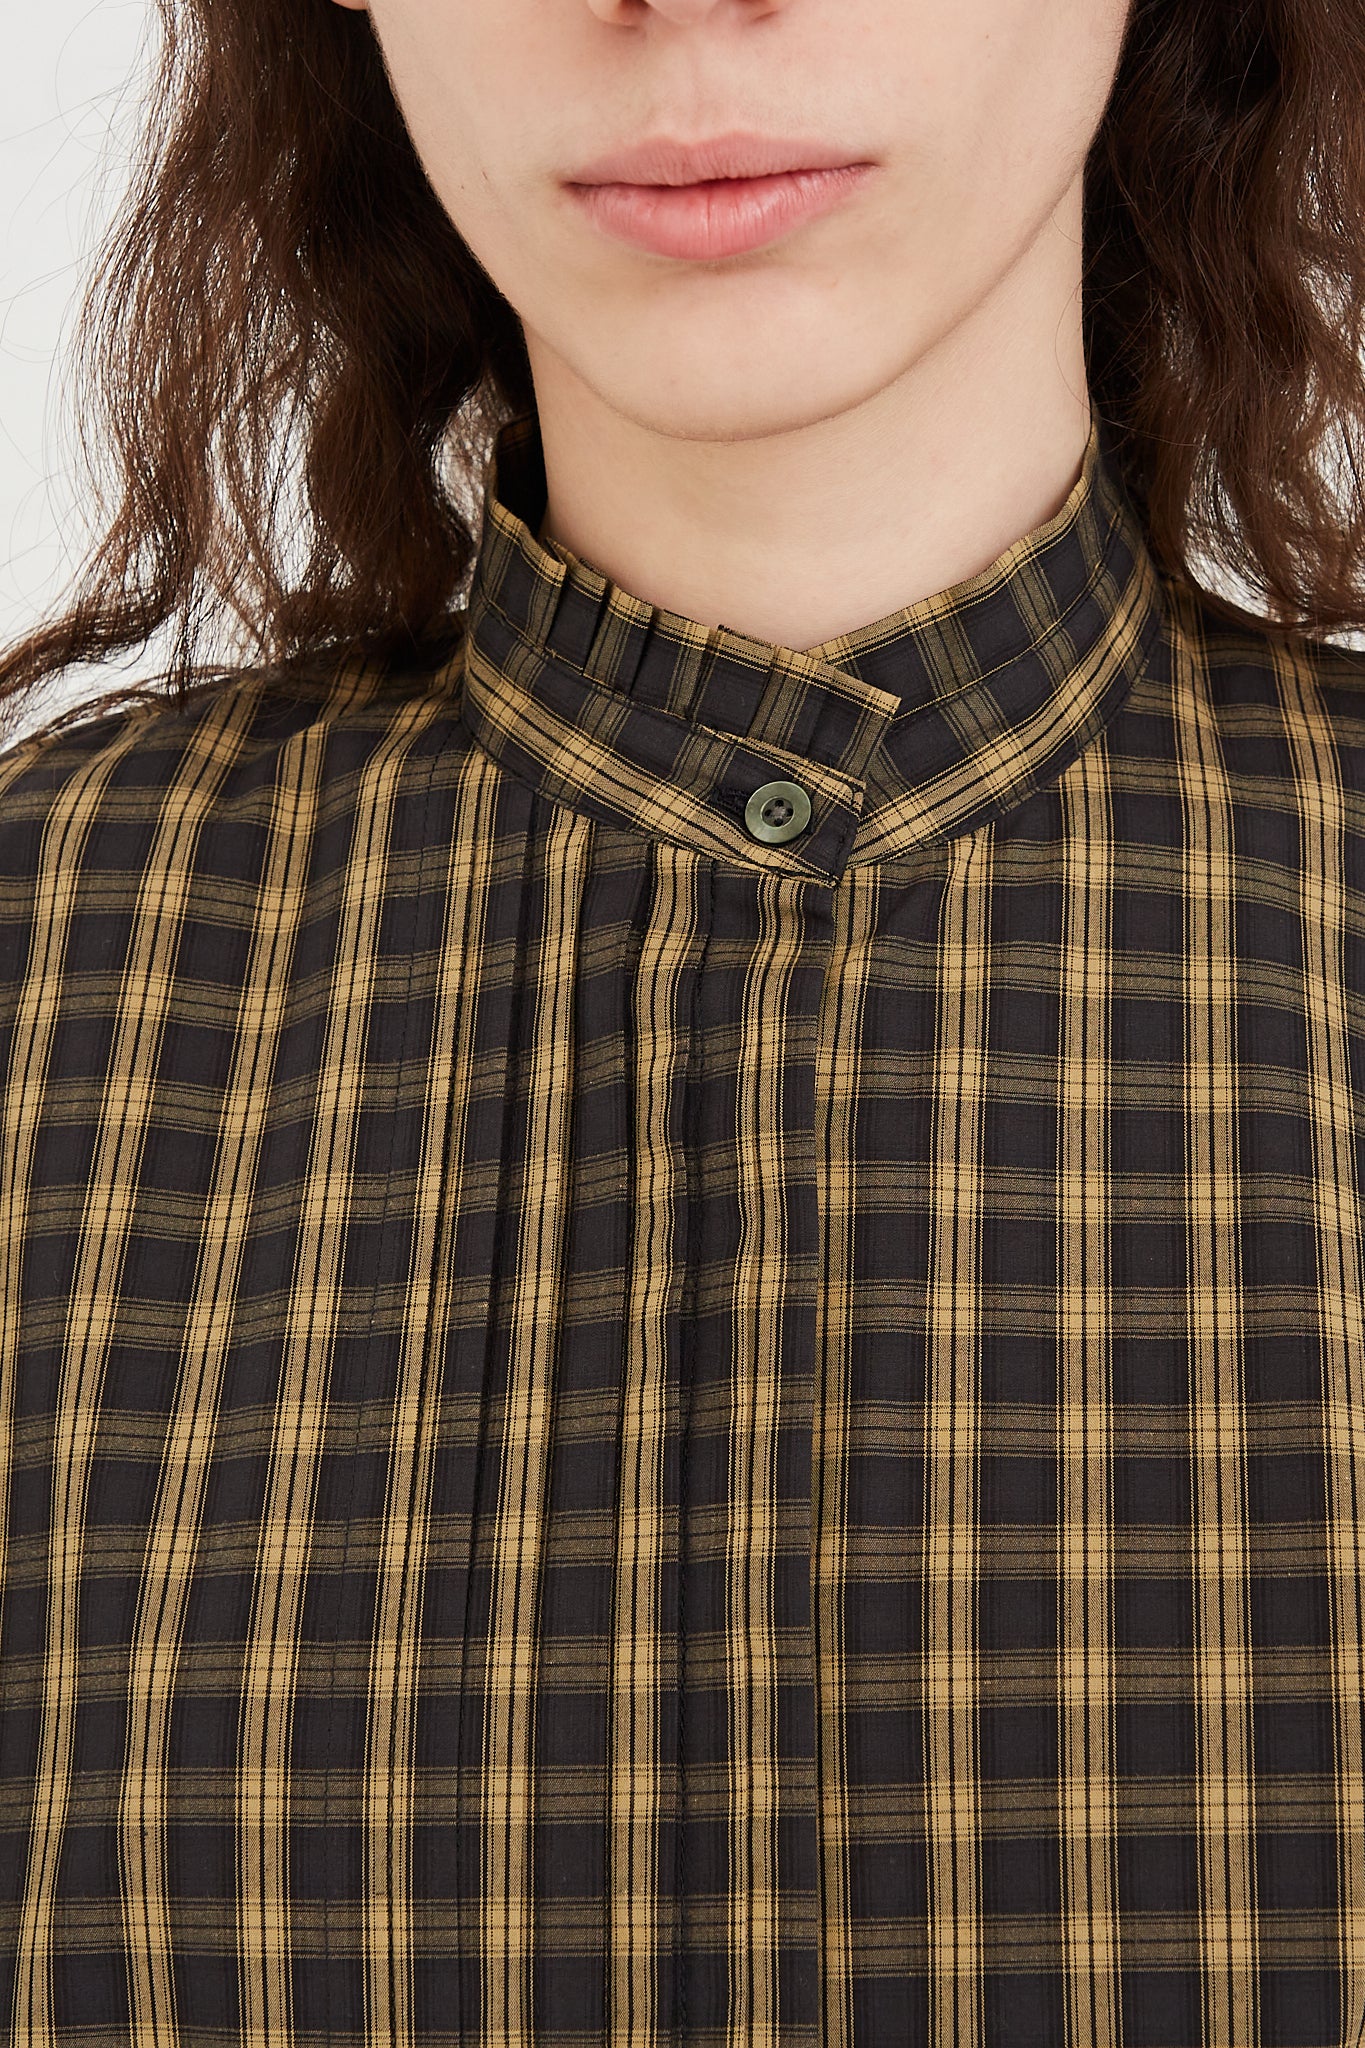 CHIMALA Pleated Stand Collar Shirt in Yellow Check - Oroboro Store | Front view and up close highlighting collar details and button